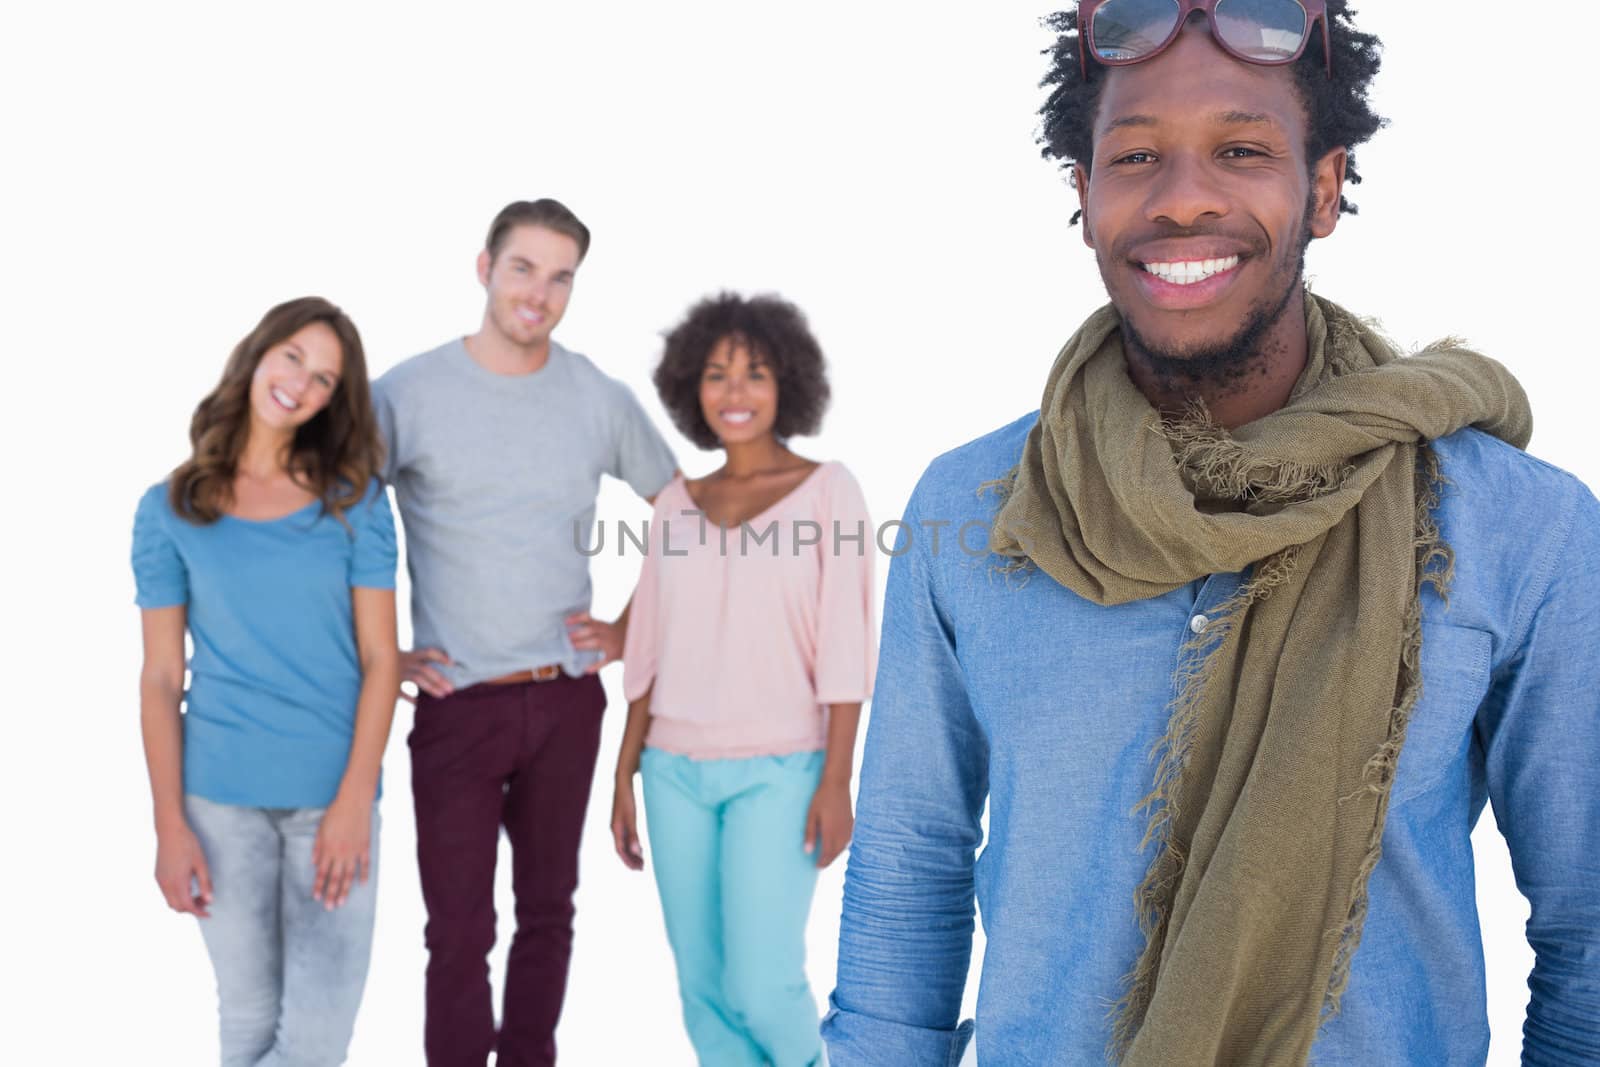 Fashion man standing in front of others young people against white background 